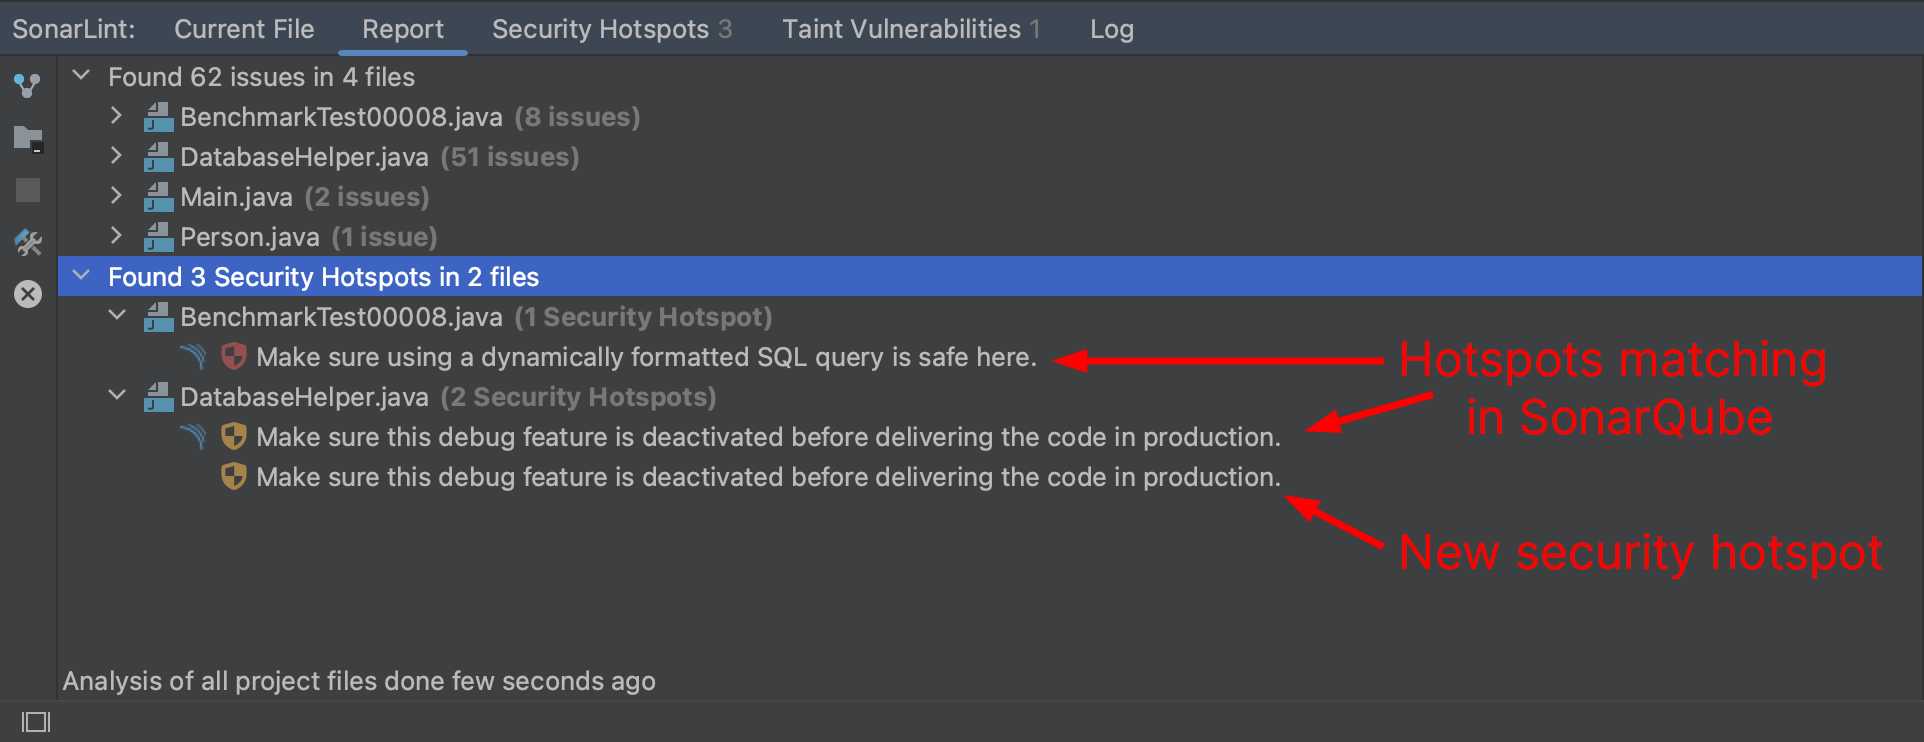 SonarLint will show you an additional SonarQube or SonarCloud icon to help show you if it's known by the server.